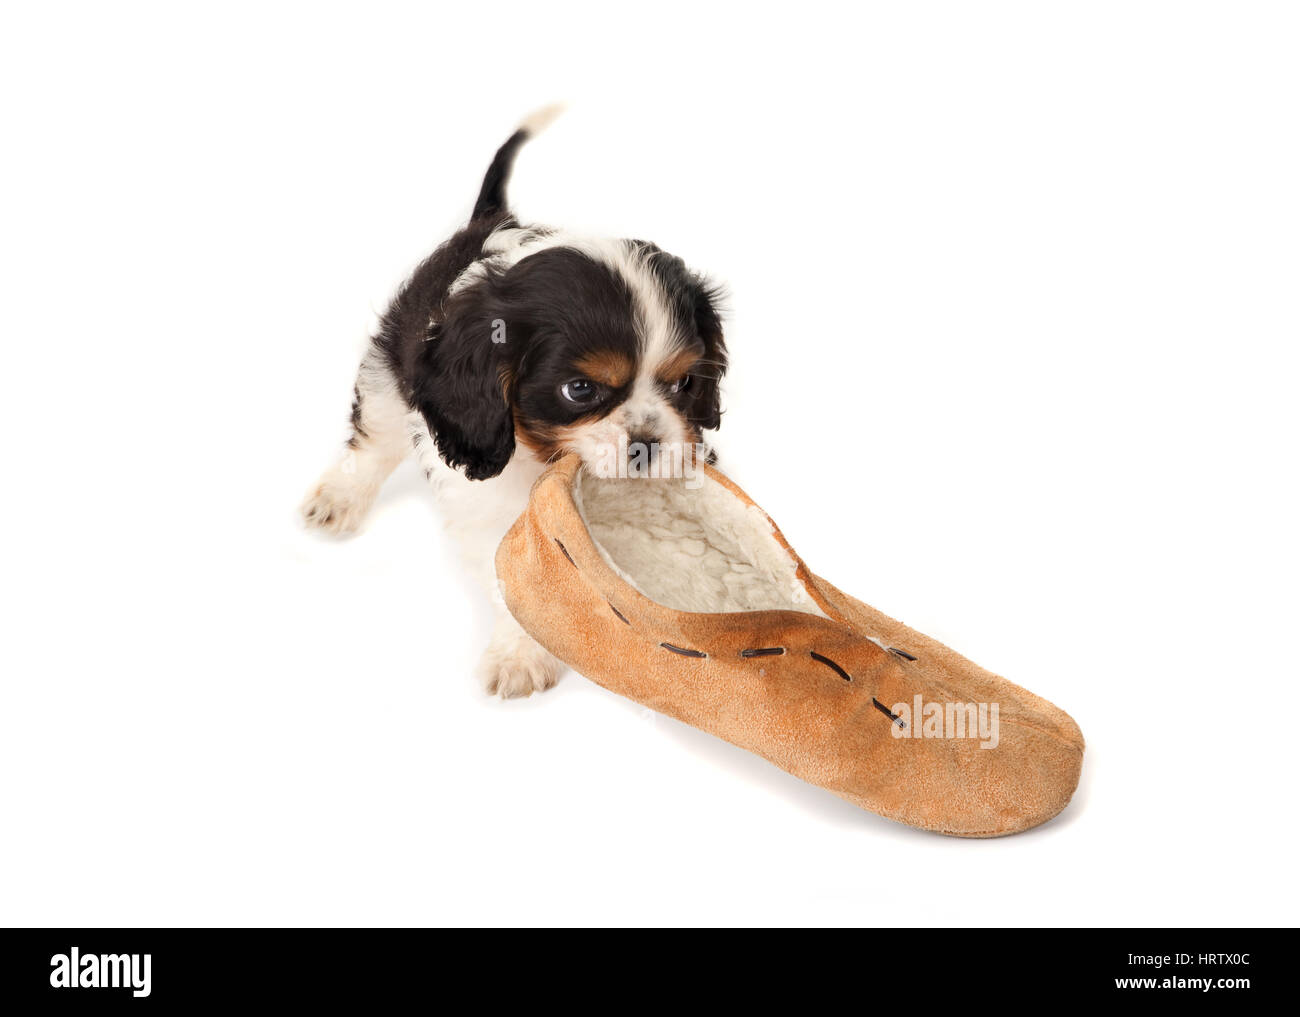 King Charles puppy dog playing with an old slipper Stock Photo